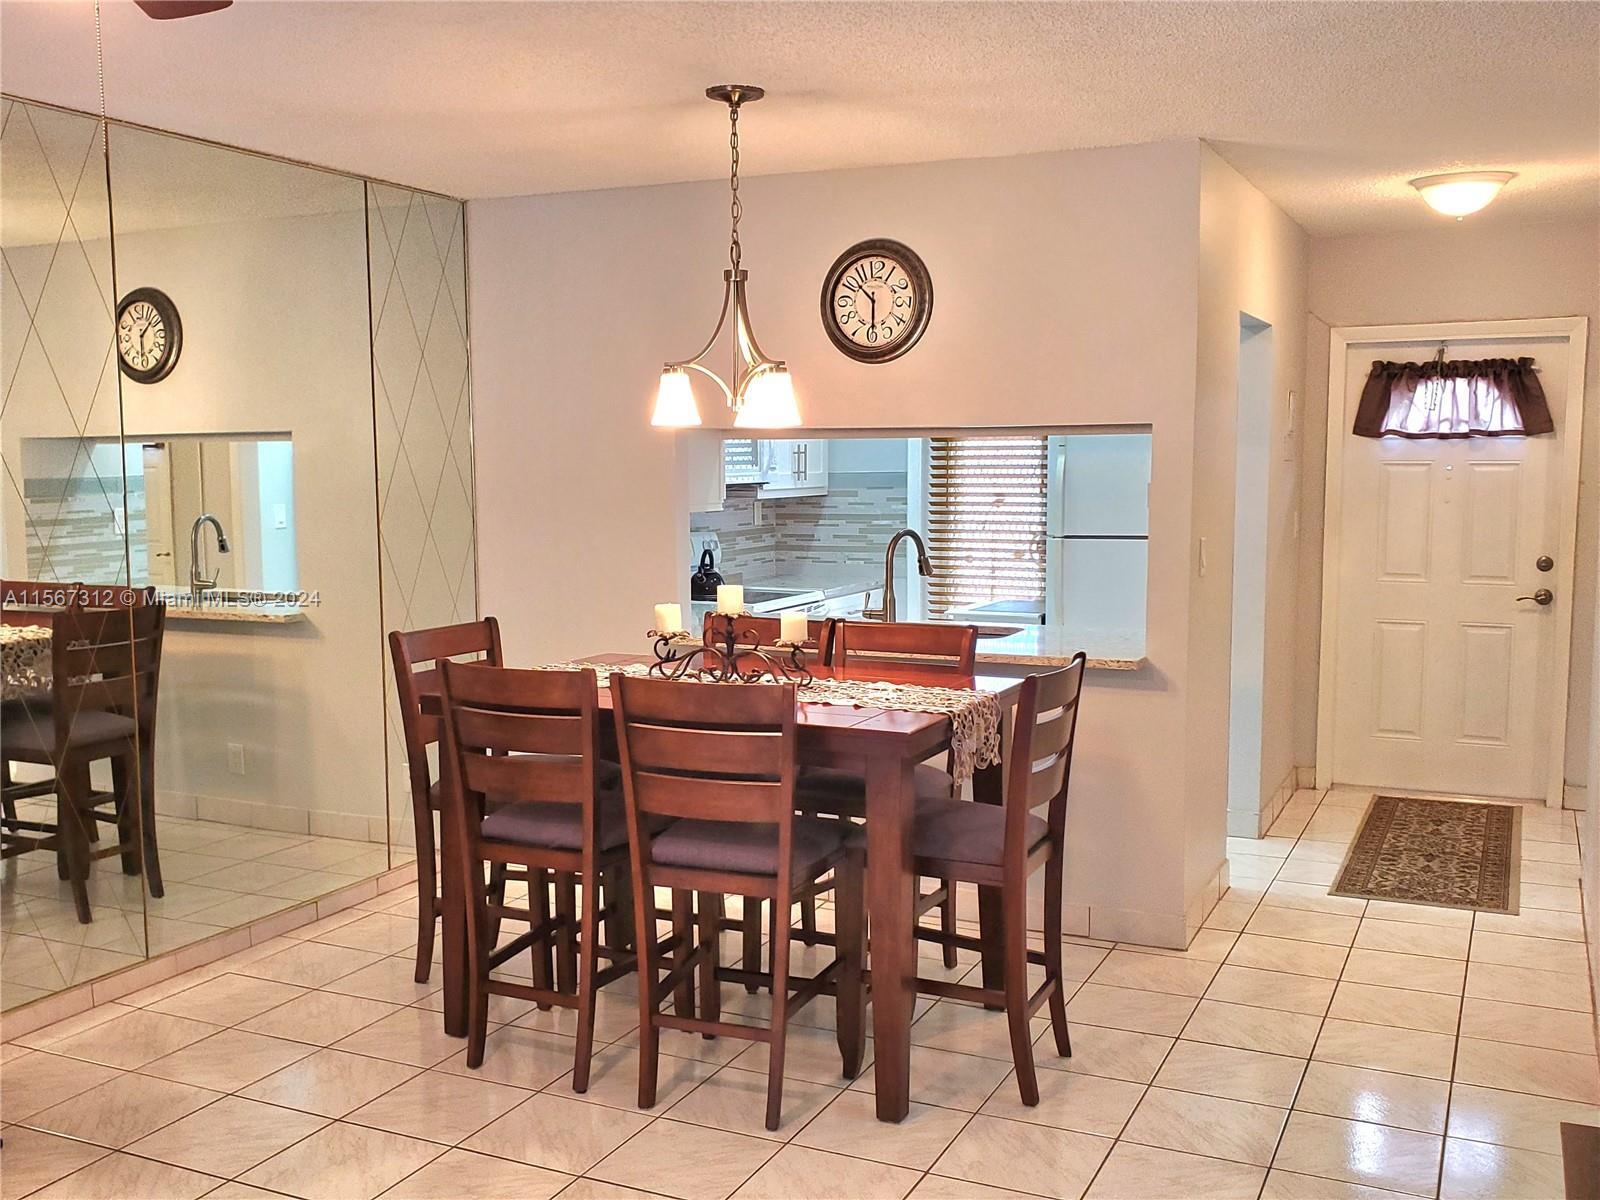 Photo of 5071 W Oakland Park Blvd #209 in Lauderdale Lakes, FL